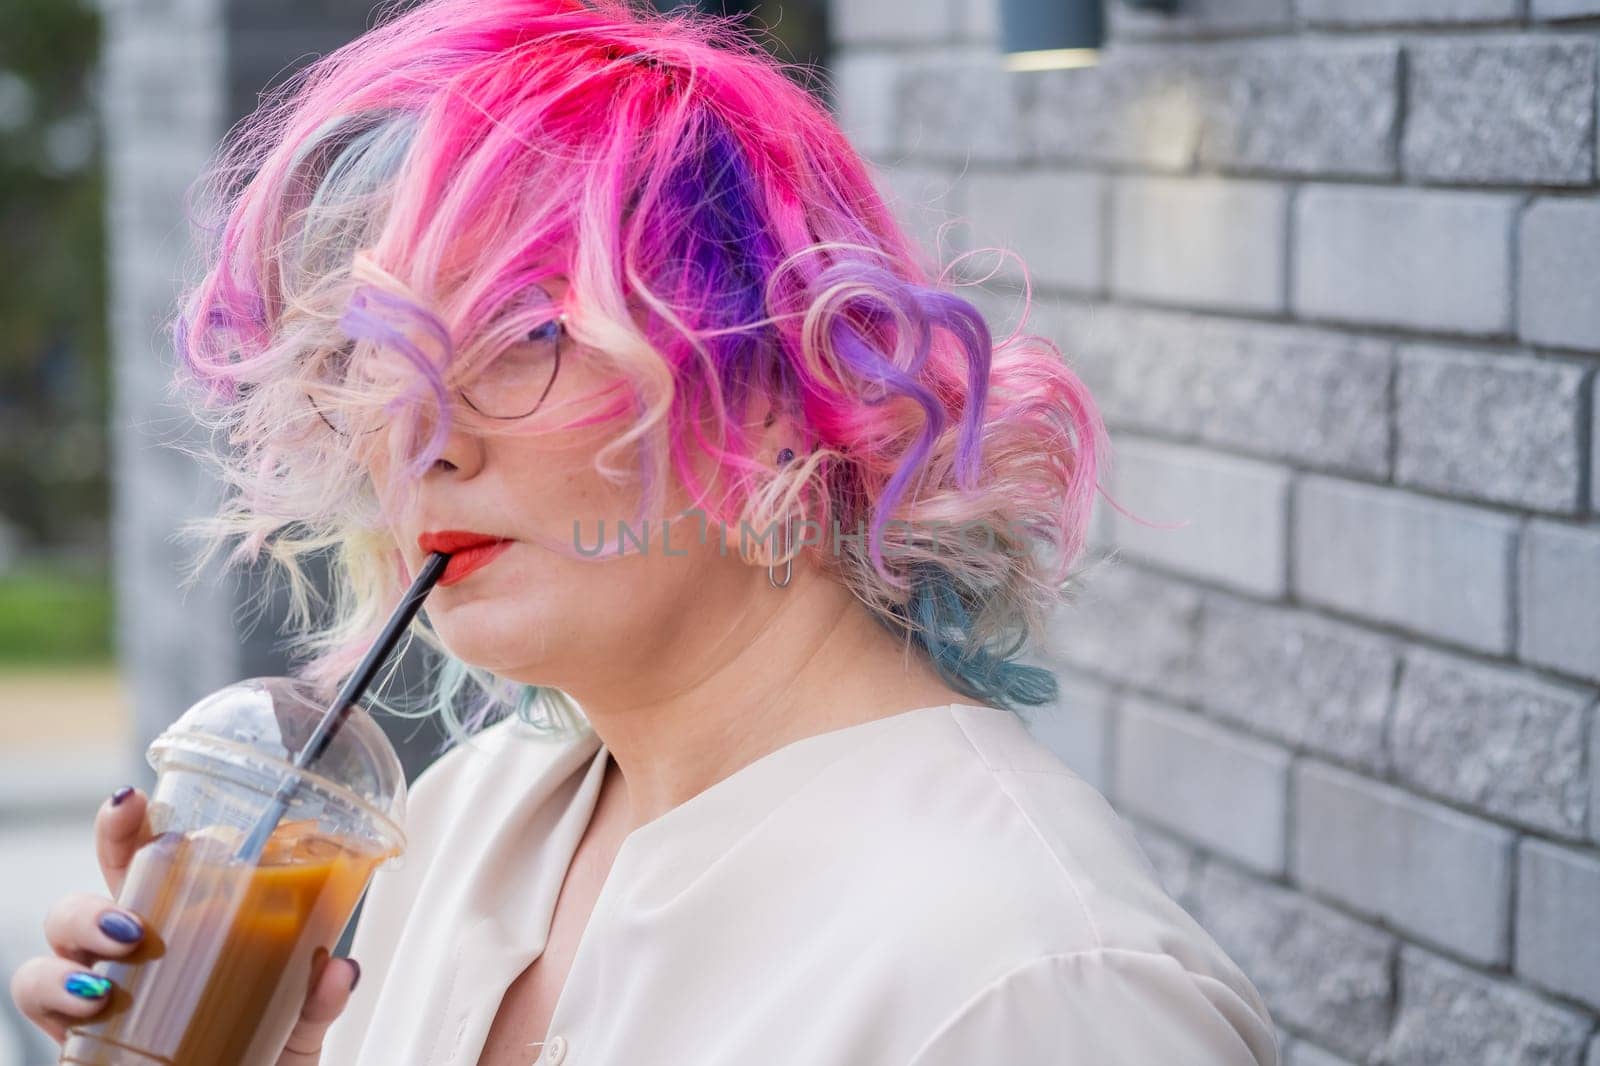 Close-up portrait of curly Caucasian woman with multi-colored hair wearing glasses. The hairstyle model is drinking a cold drink.